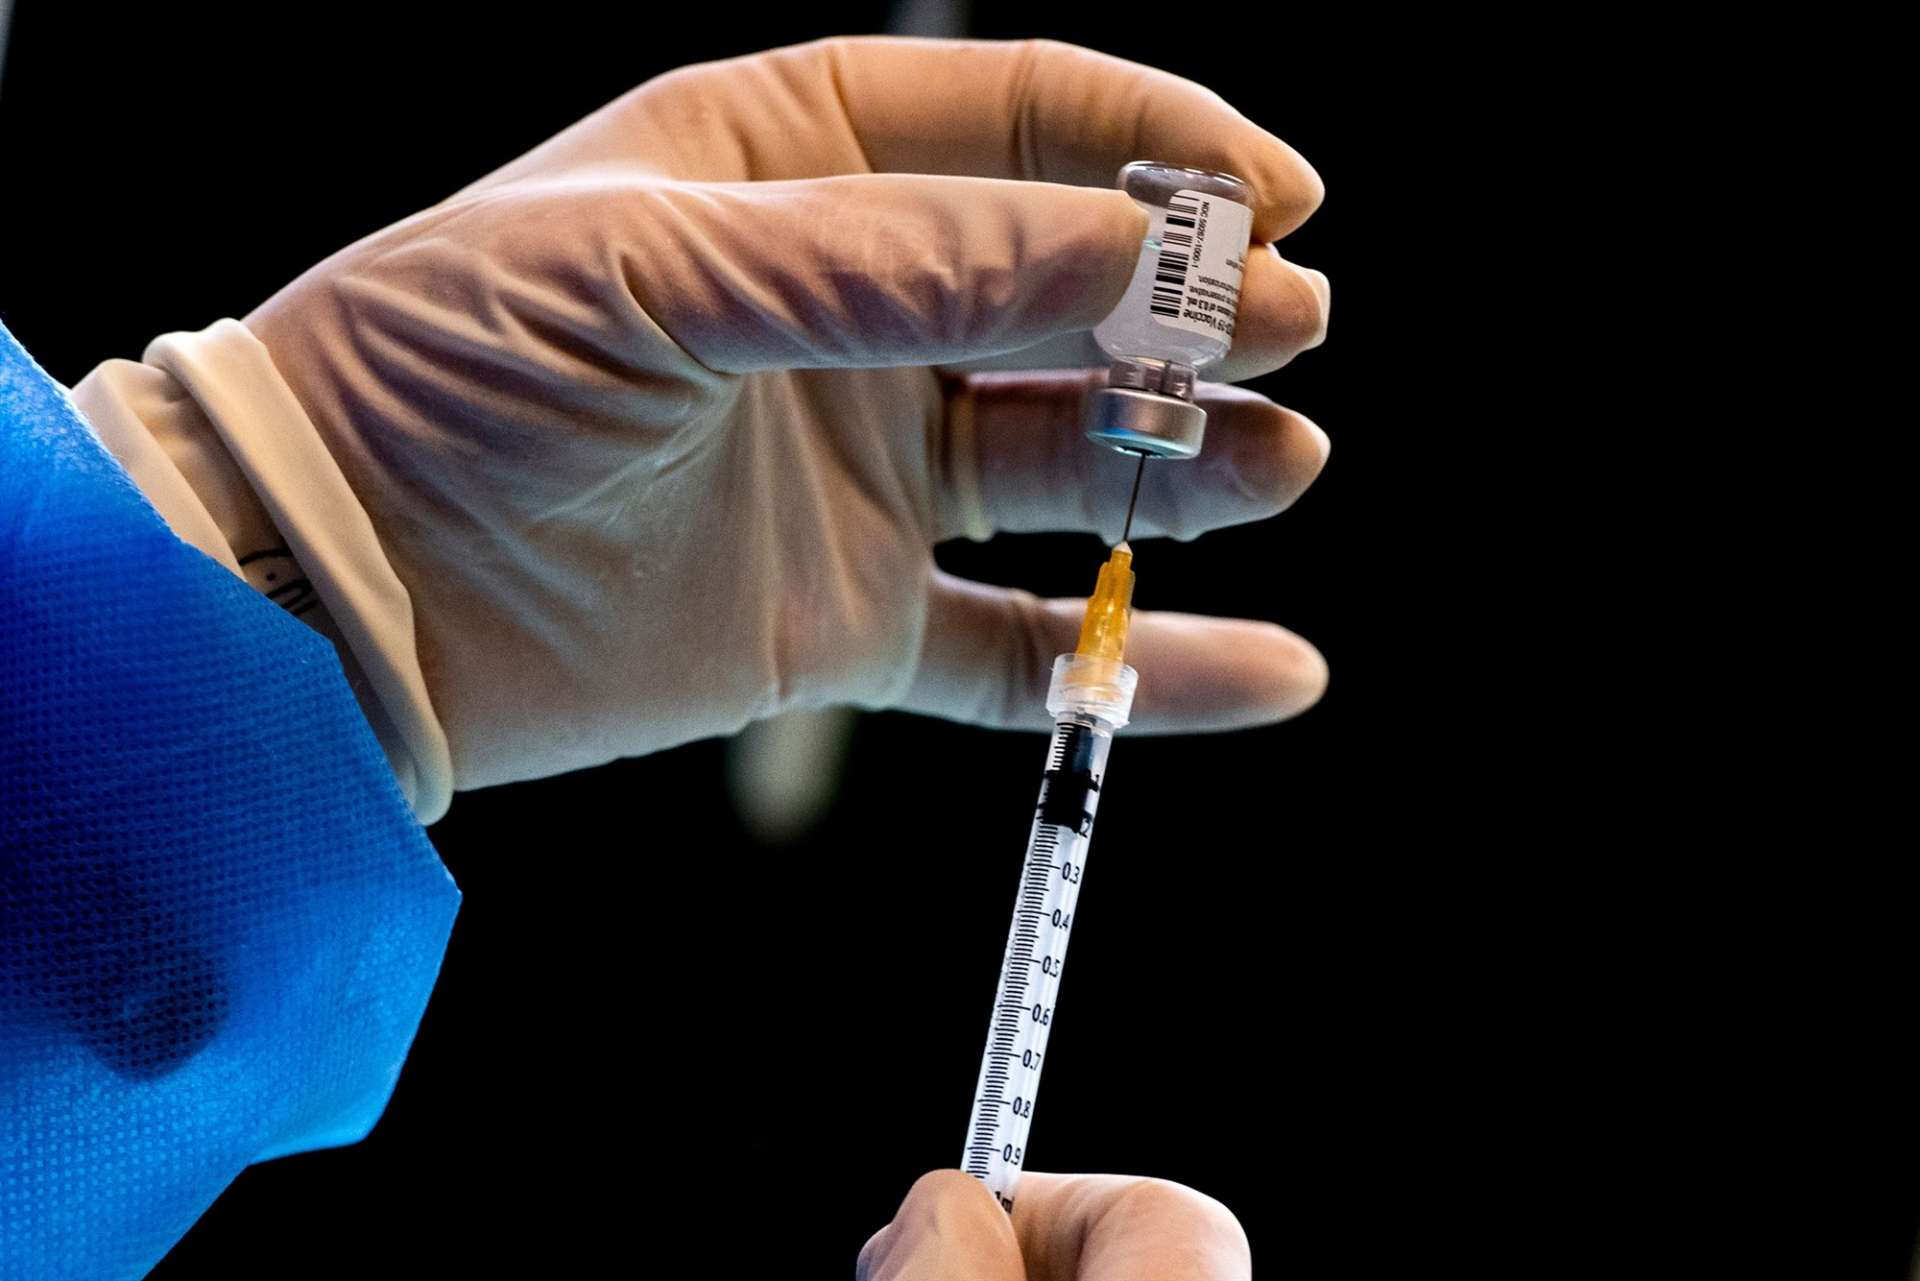 More Than 134 Million Shots Given  The biggest vaccination campaign in history is underway. More than 134 million doses have been administered across 73 countries, according to data collected by Bloomberg. The latest rate was roughly 4.74 million doses a day.   In the U.S., more Americans have now received at least one dose than have tested positive for the virus since the pandemic began. So far, 43.1 million doses have been given, according to a state-by-state tally. In the last week, an average of 1.47 million doses per day were administered.